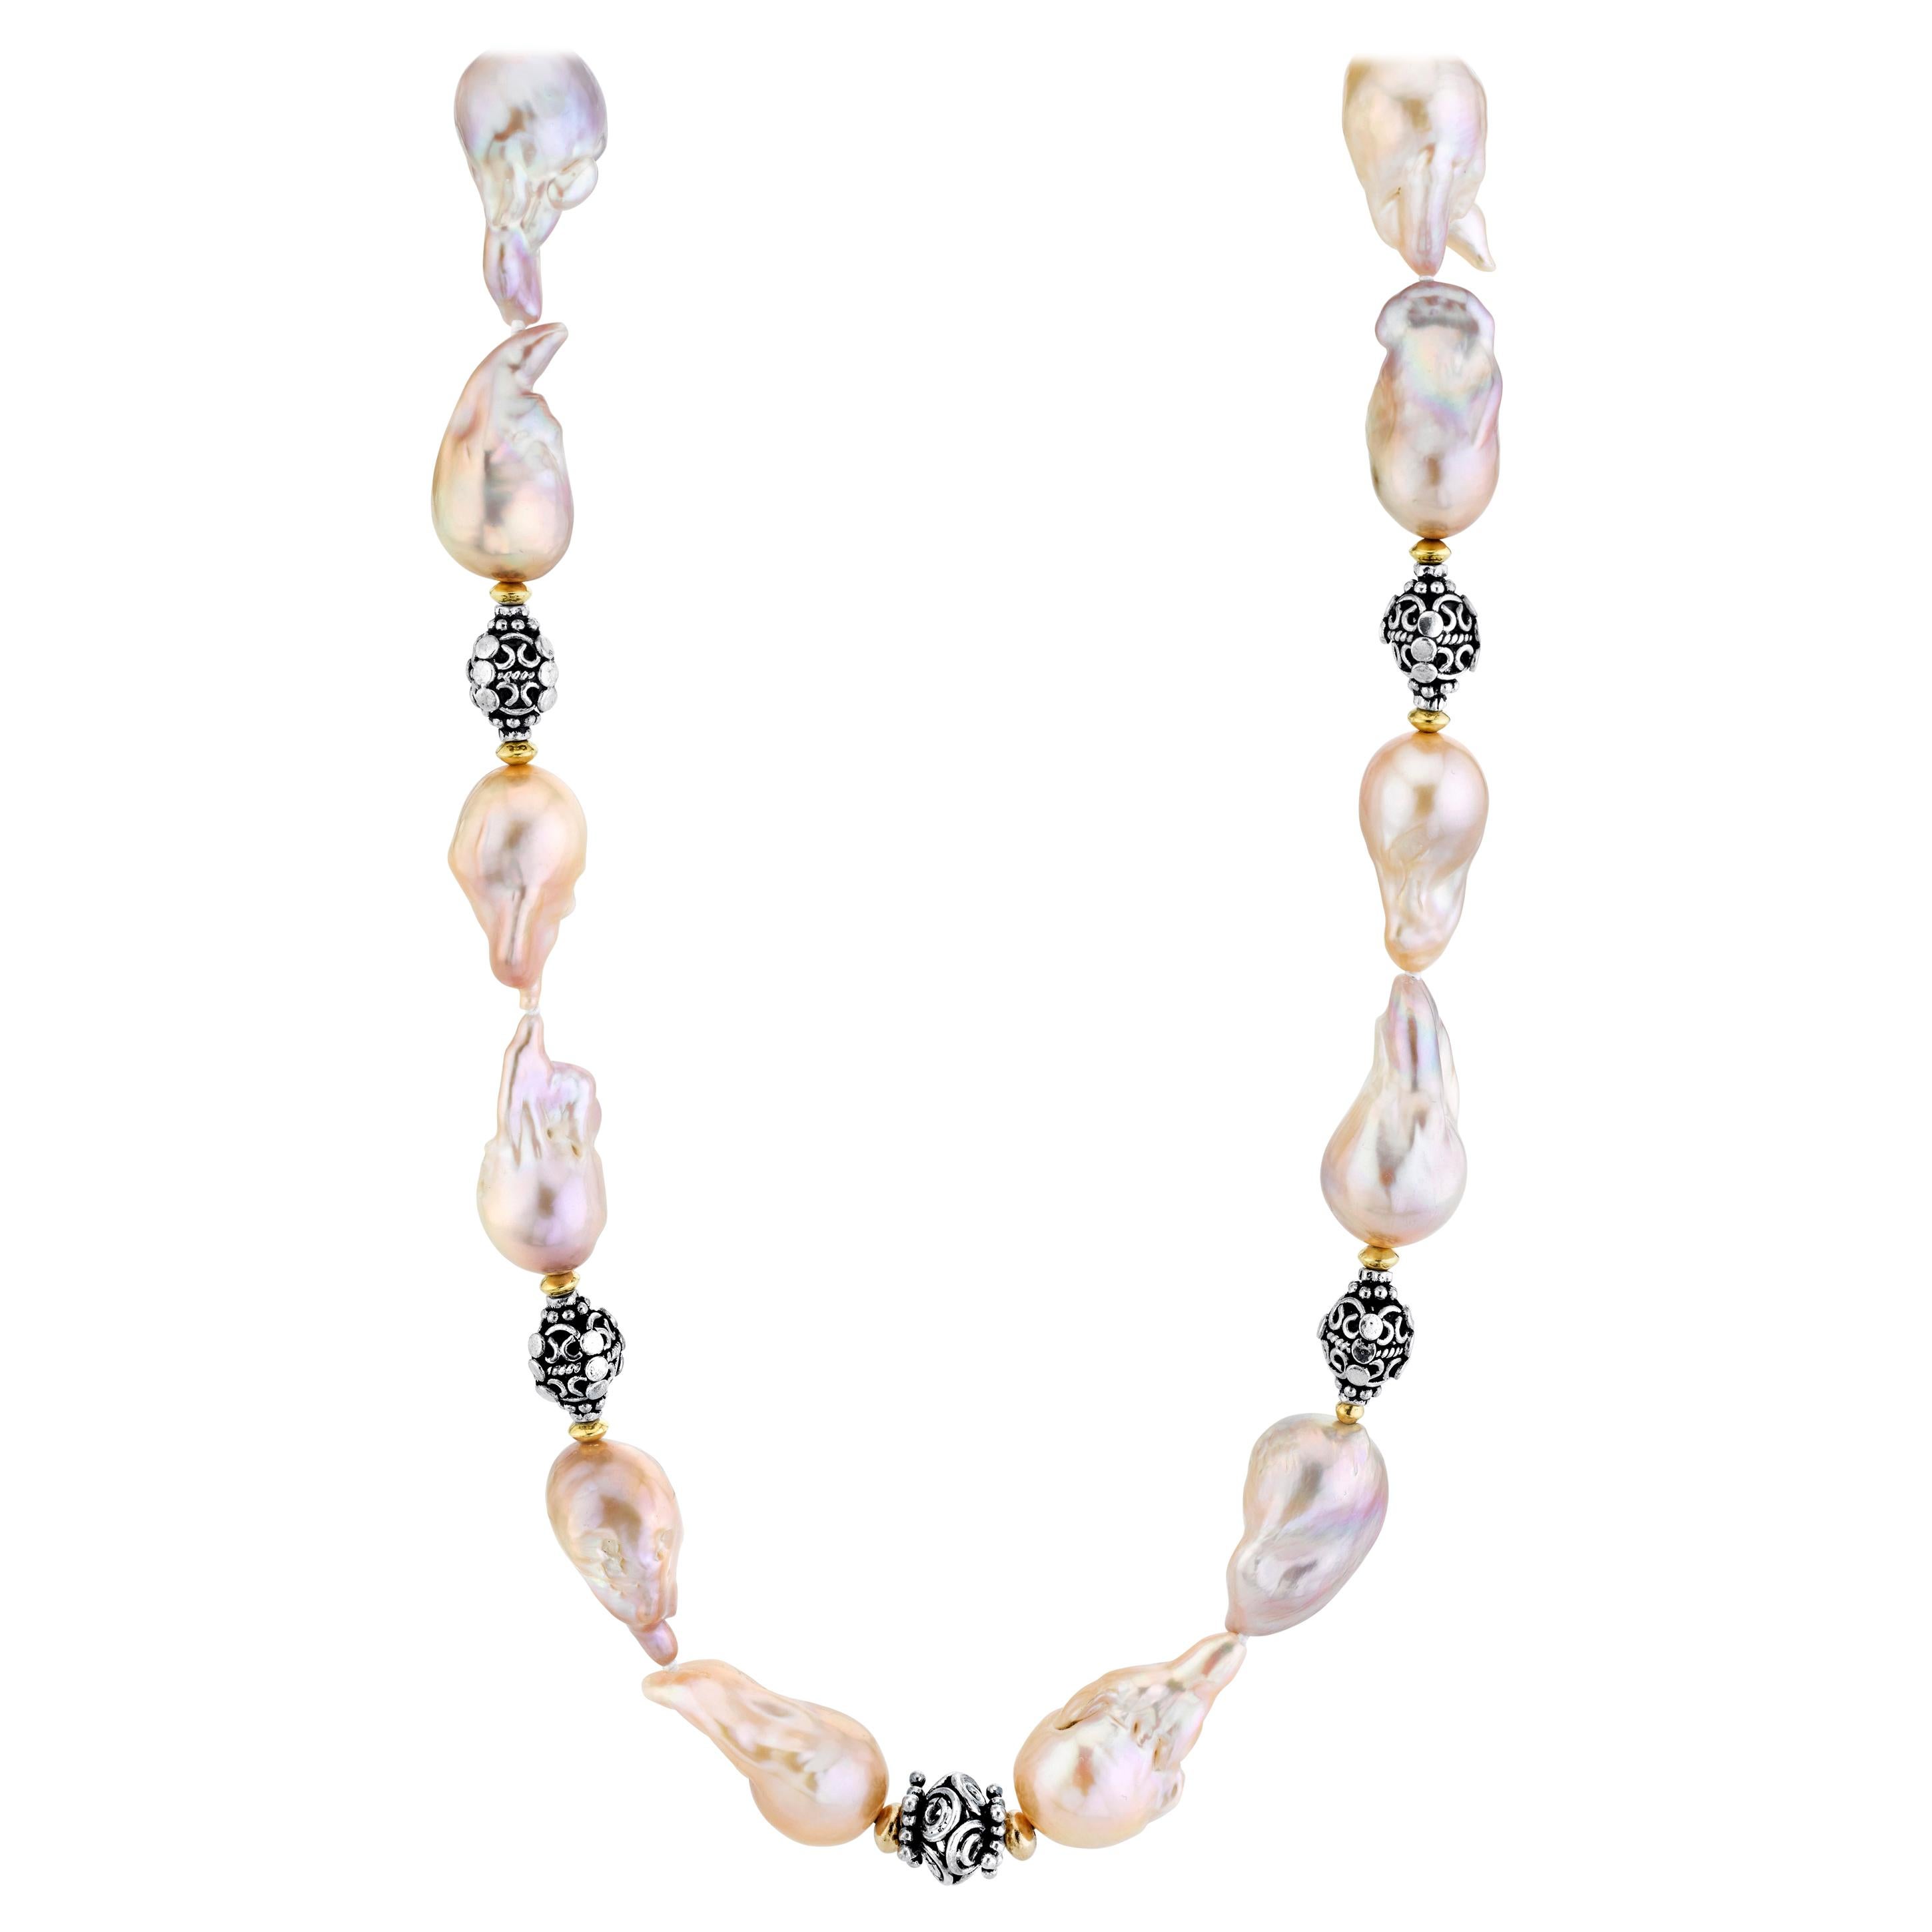 Baroque Pearl Necklace with Silver, 18k and 22k Yellow Gold Accents and Clasp